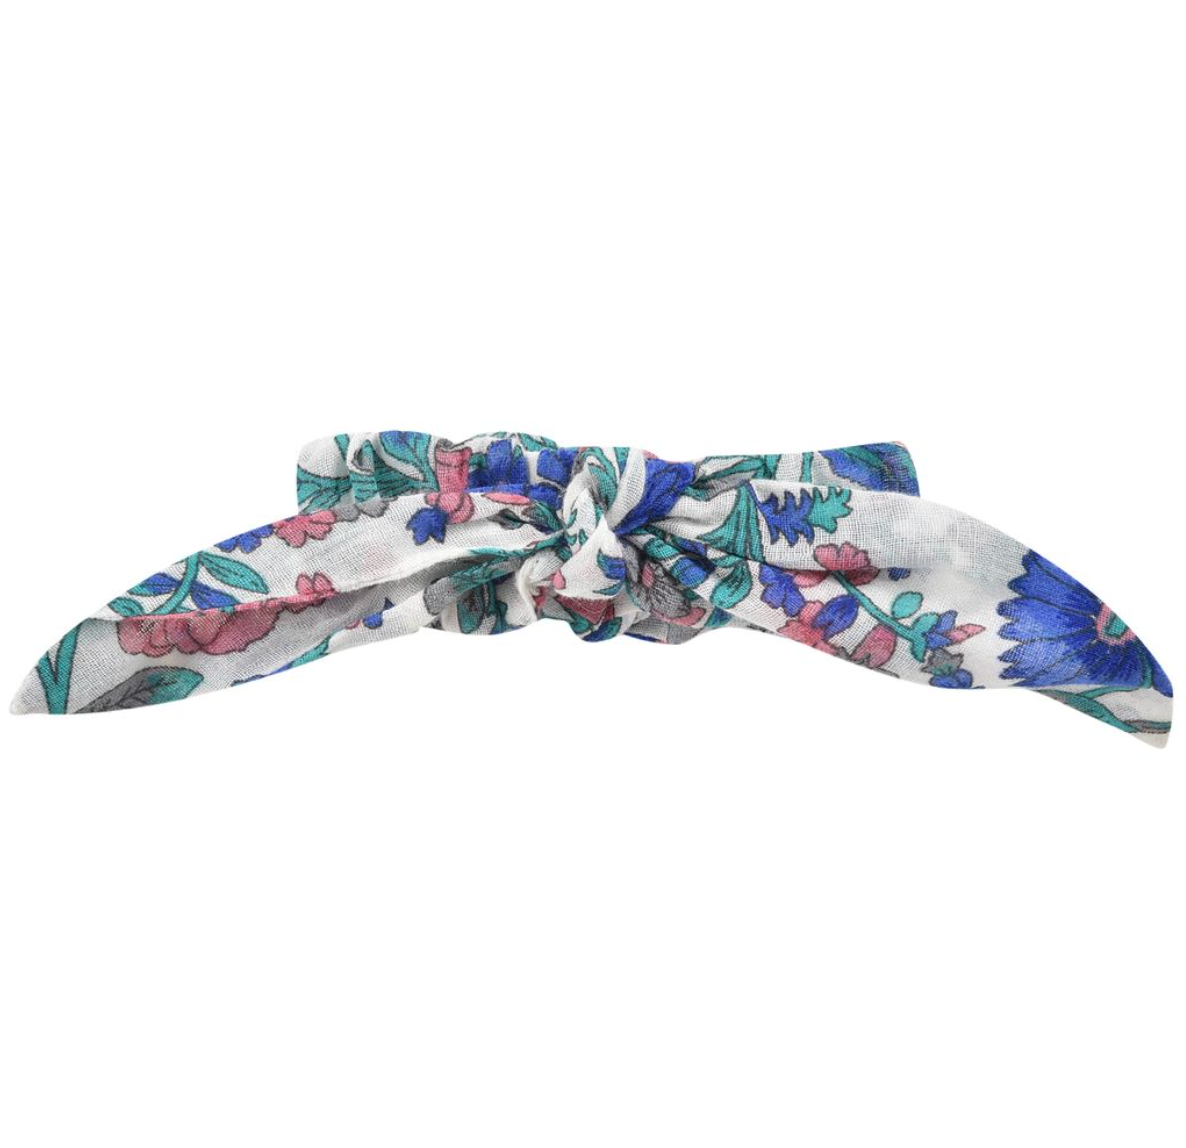 A floral hair scrunchie with a decorative bow. Made with 100% organic cotton. Louise misha chloe scrunchie in blue summer meadow.